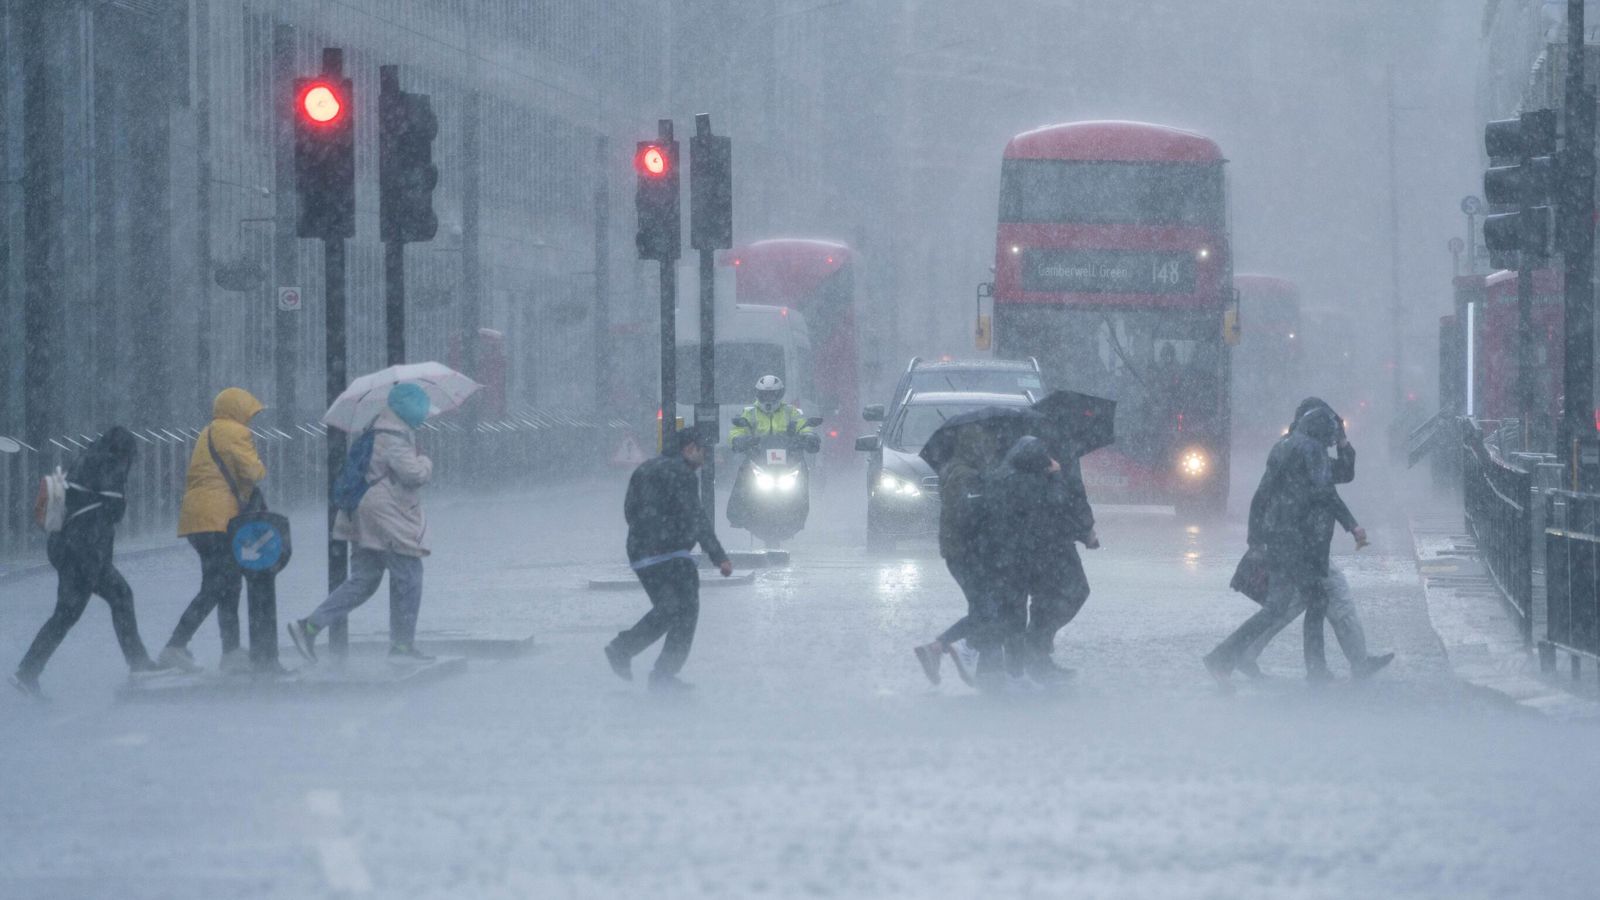 snowy weather warnings issued as temperatures plunge across the uk.